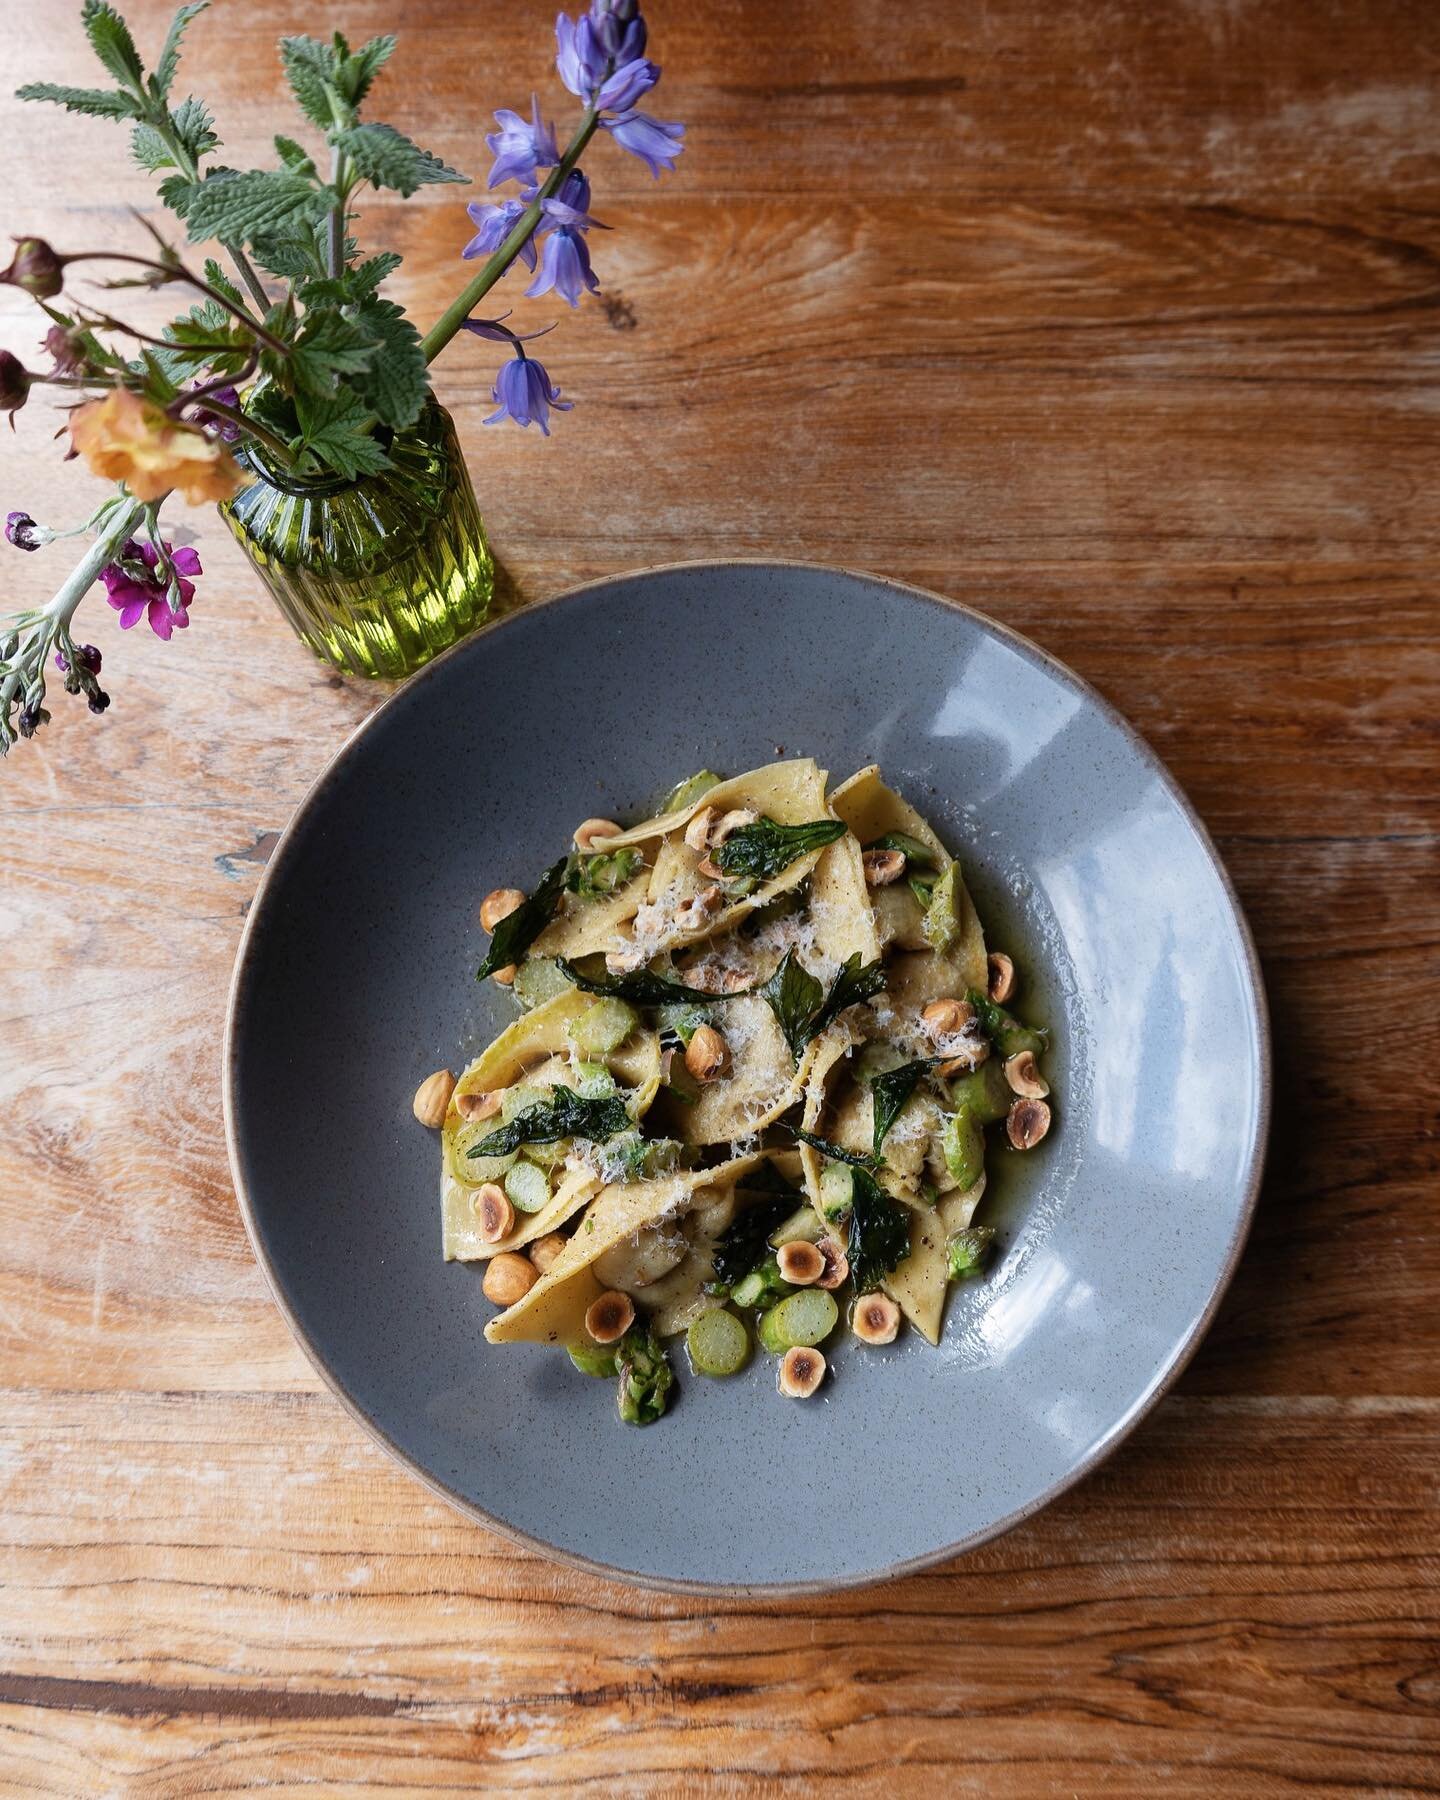 Spring dishes 🌱 Shorthorn beef cappellacci, asparagus, brown butter, hazelnuts and lovage. 

#springmenu #localfood #handmadepasta #scottishproduce